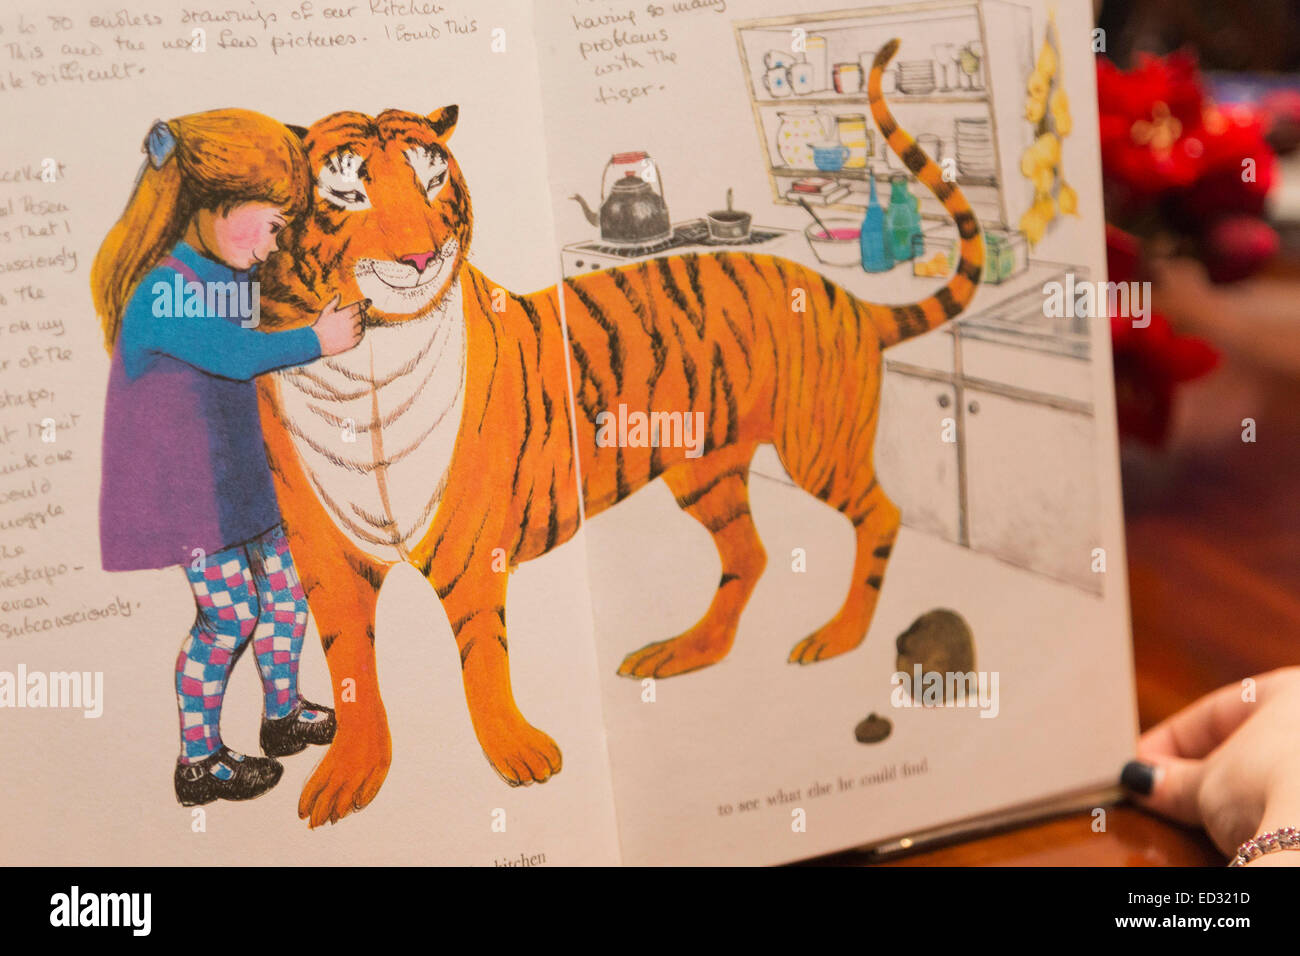 London, UK. 4 December 2014. Judith Kerr's 'The Tiger who came to tea' features annotations on the story behind the creation as well as the tiger wearing a top hat. On Monday, 8 December 2014, Sotheby's will host 'First Editions: Redrawn', an auction of annotated first editions from some of the world's greatest living illustrators to raise money for the 'House of Illustration'.  Thirty-four much loved illustrators - and some authors - have annotated and re-drawn timeless classics, giving a unique insight into the creative process involved. Stock Photo